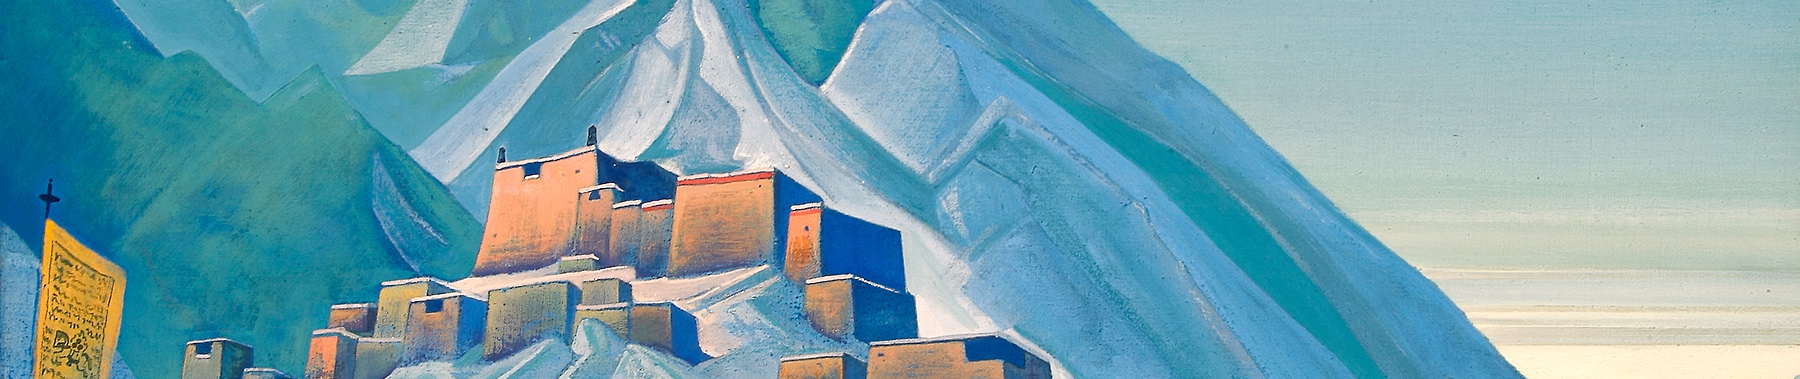 A detail of one of Roerich's paintings: eerily lit square buildings nestled in snowy moutains.